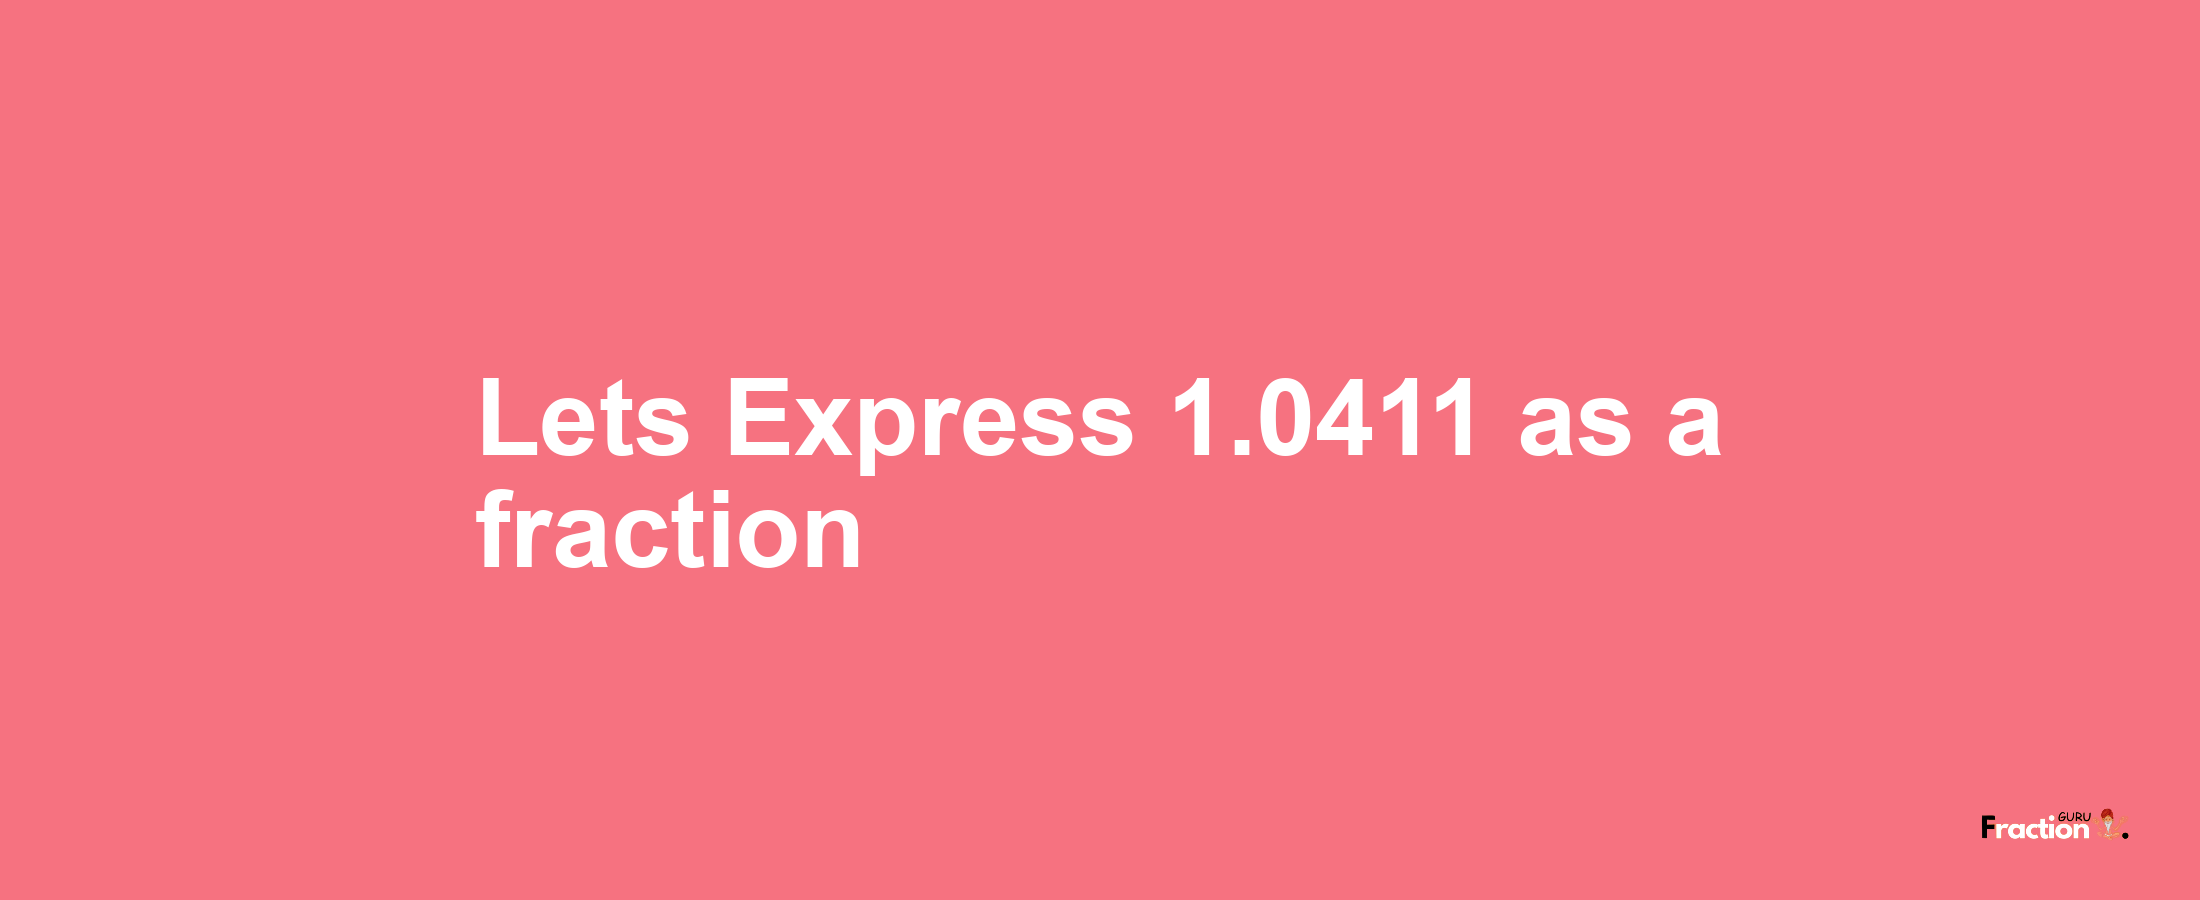 Lets Express 1.0411 as afraction